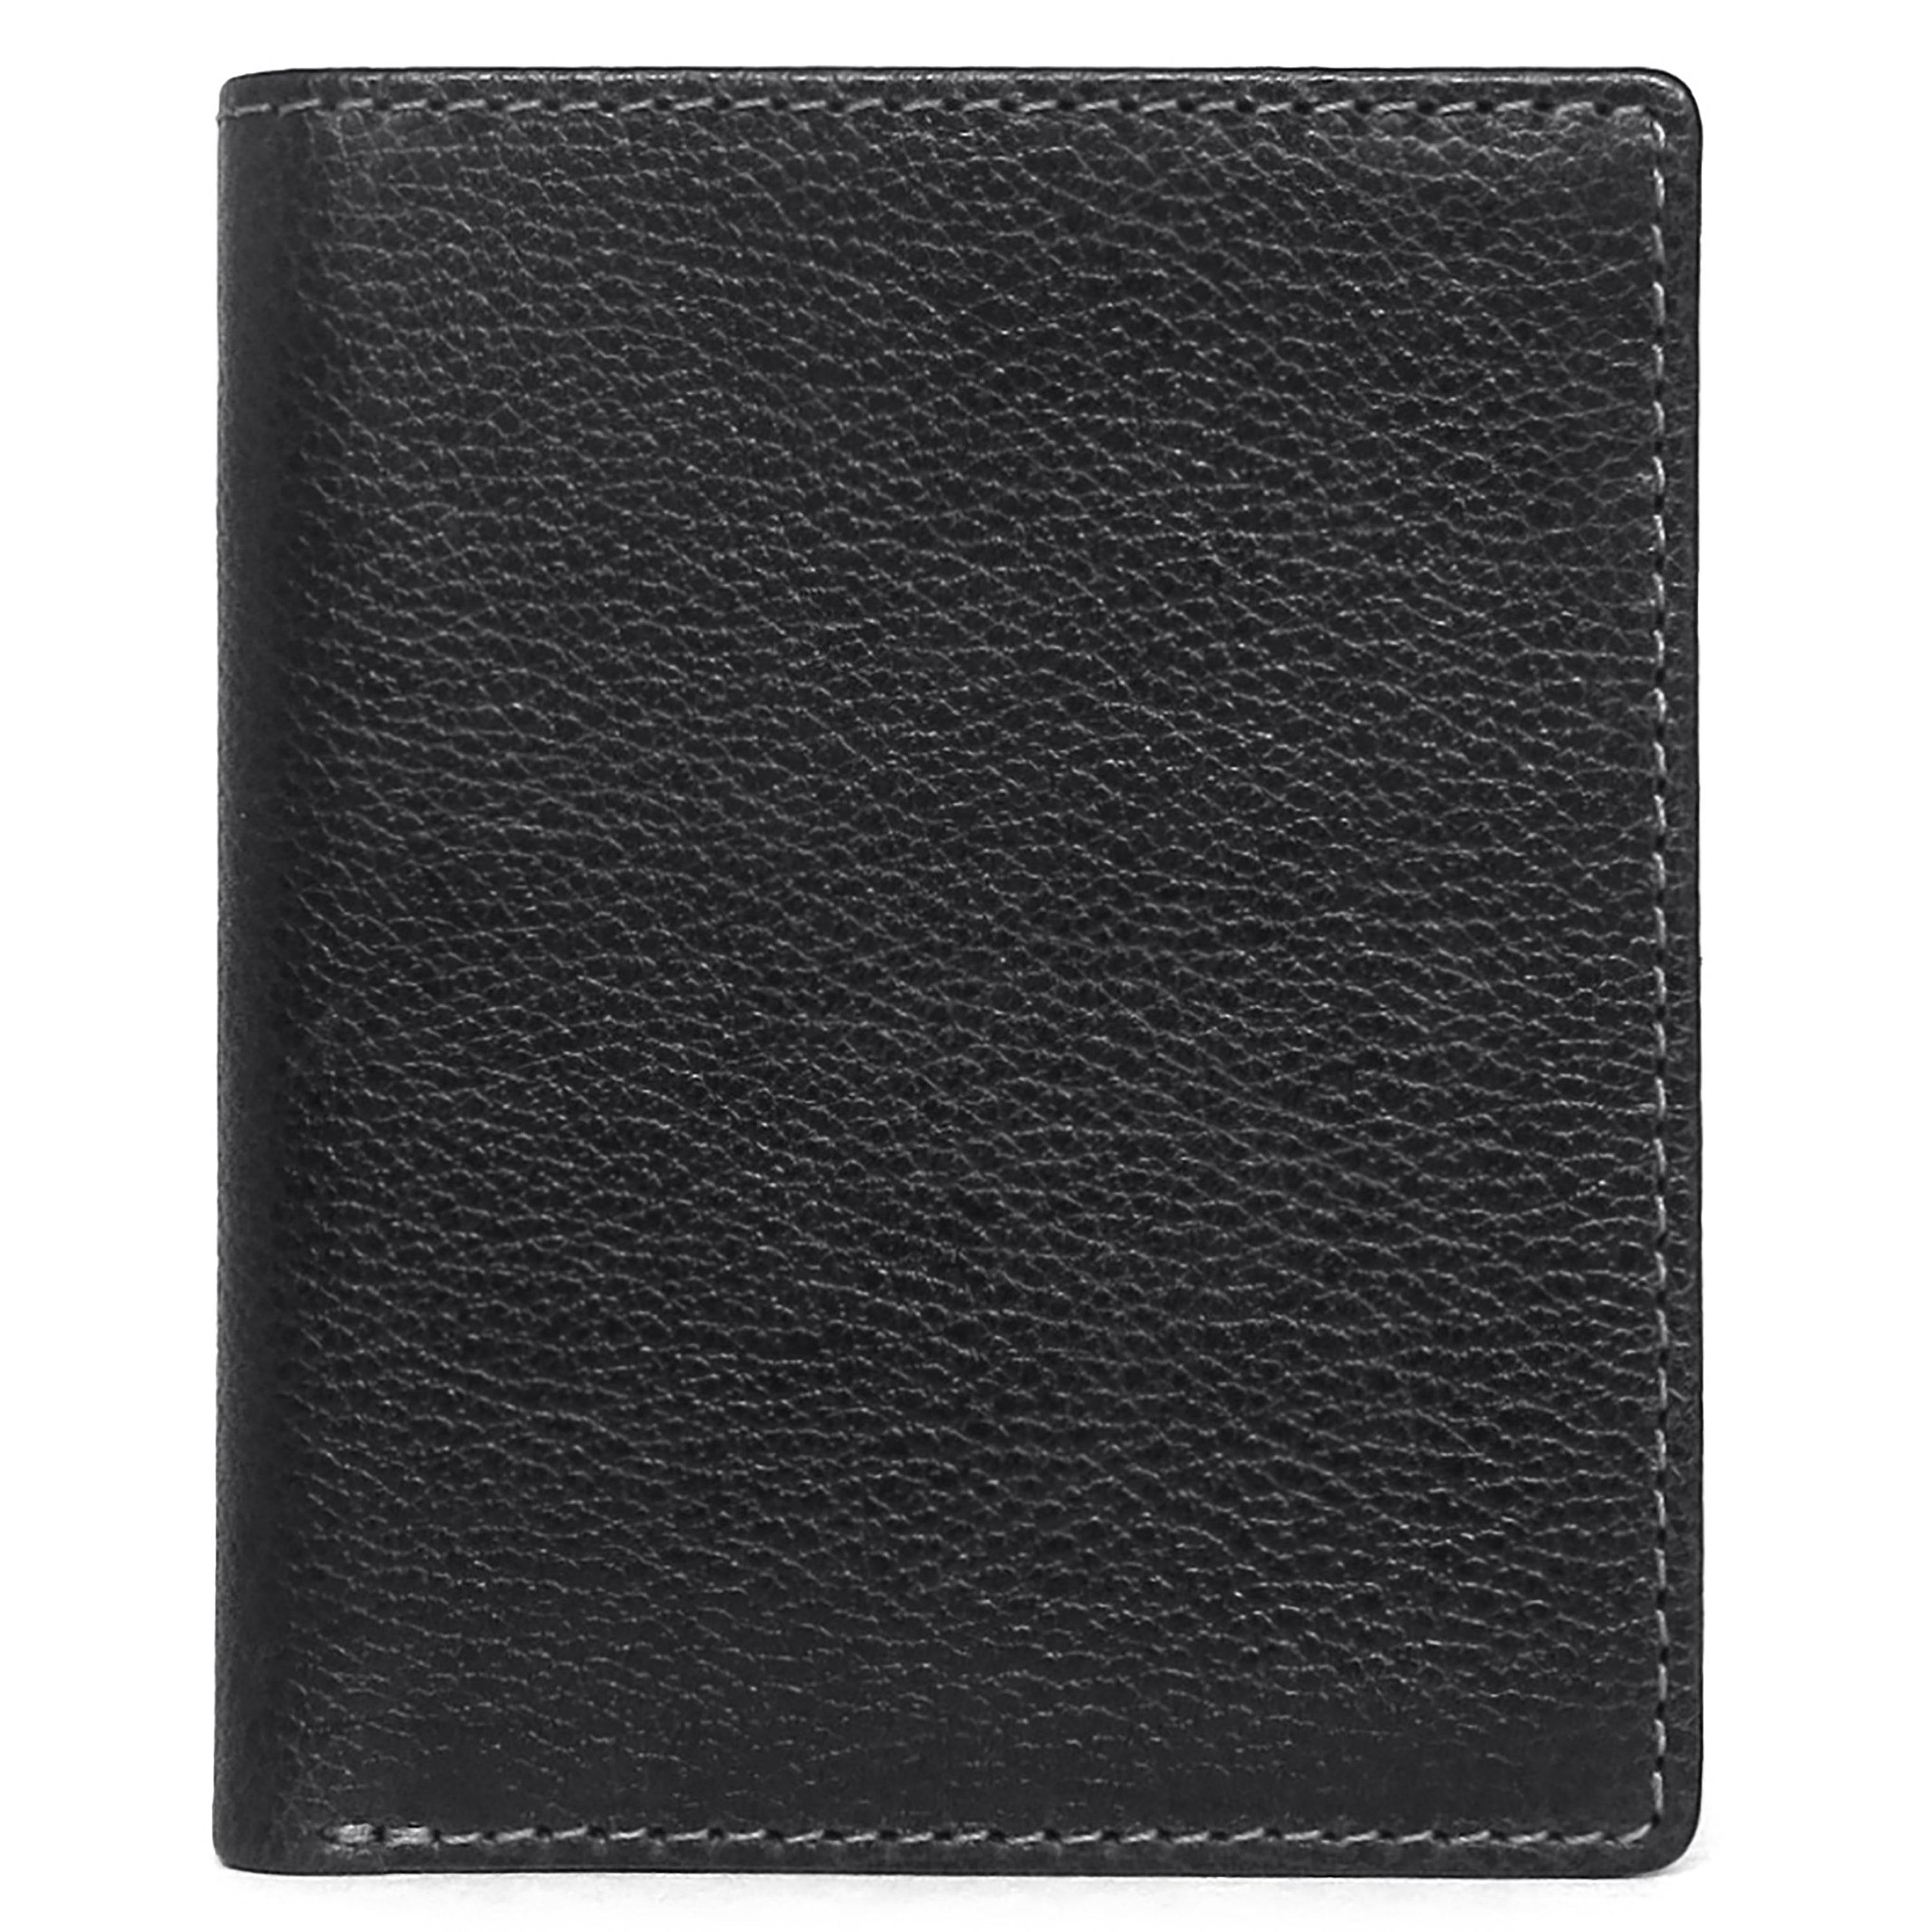 a black leather wallet on a white background